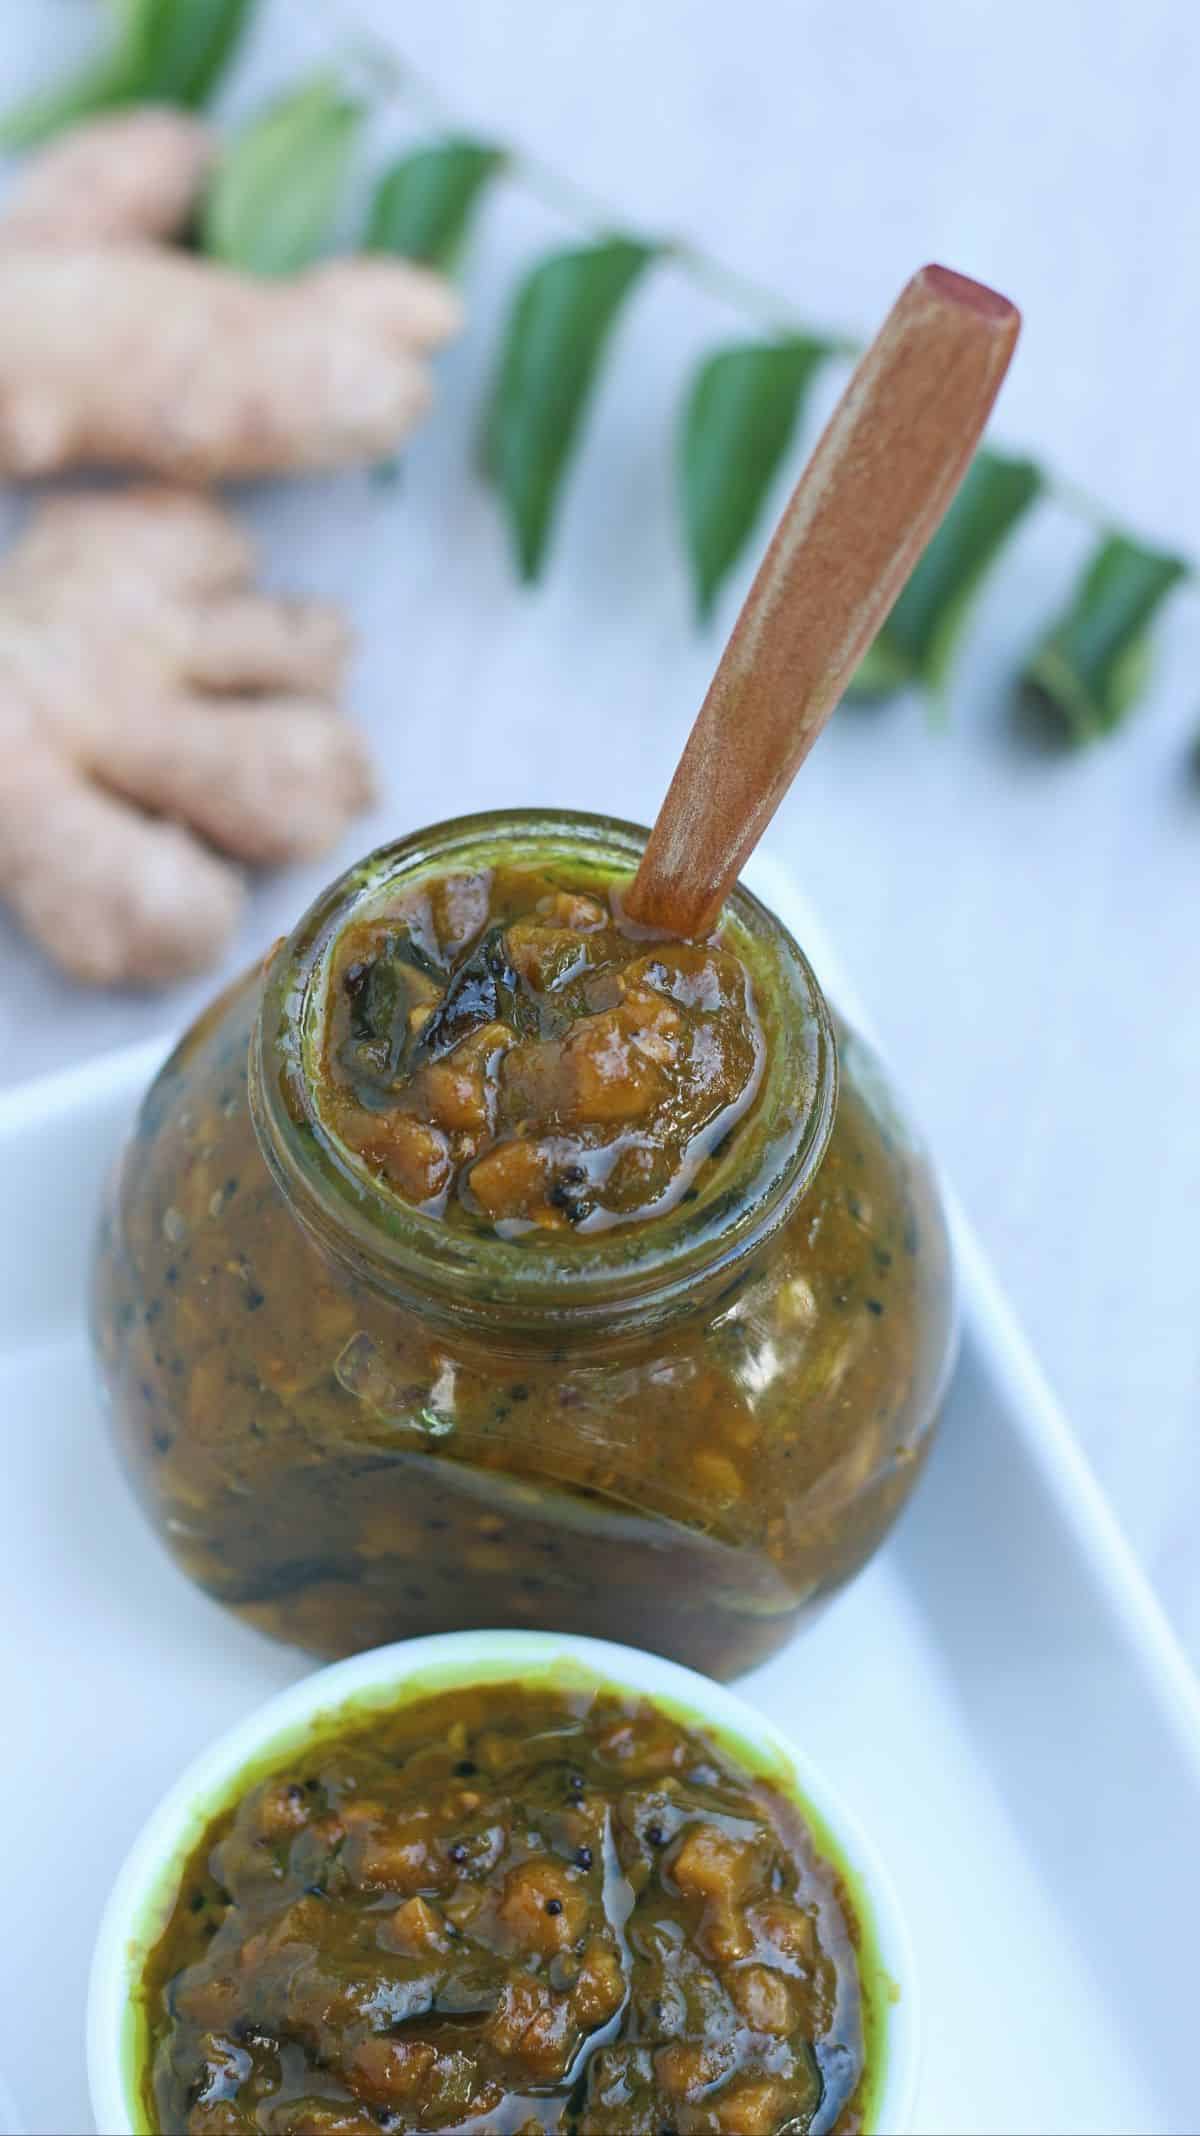 ginger and green chili pickle in a jar with wooden spoon